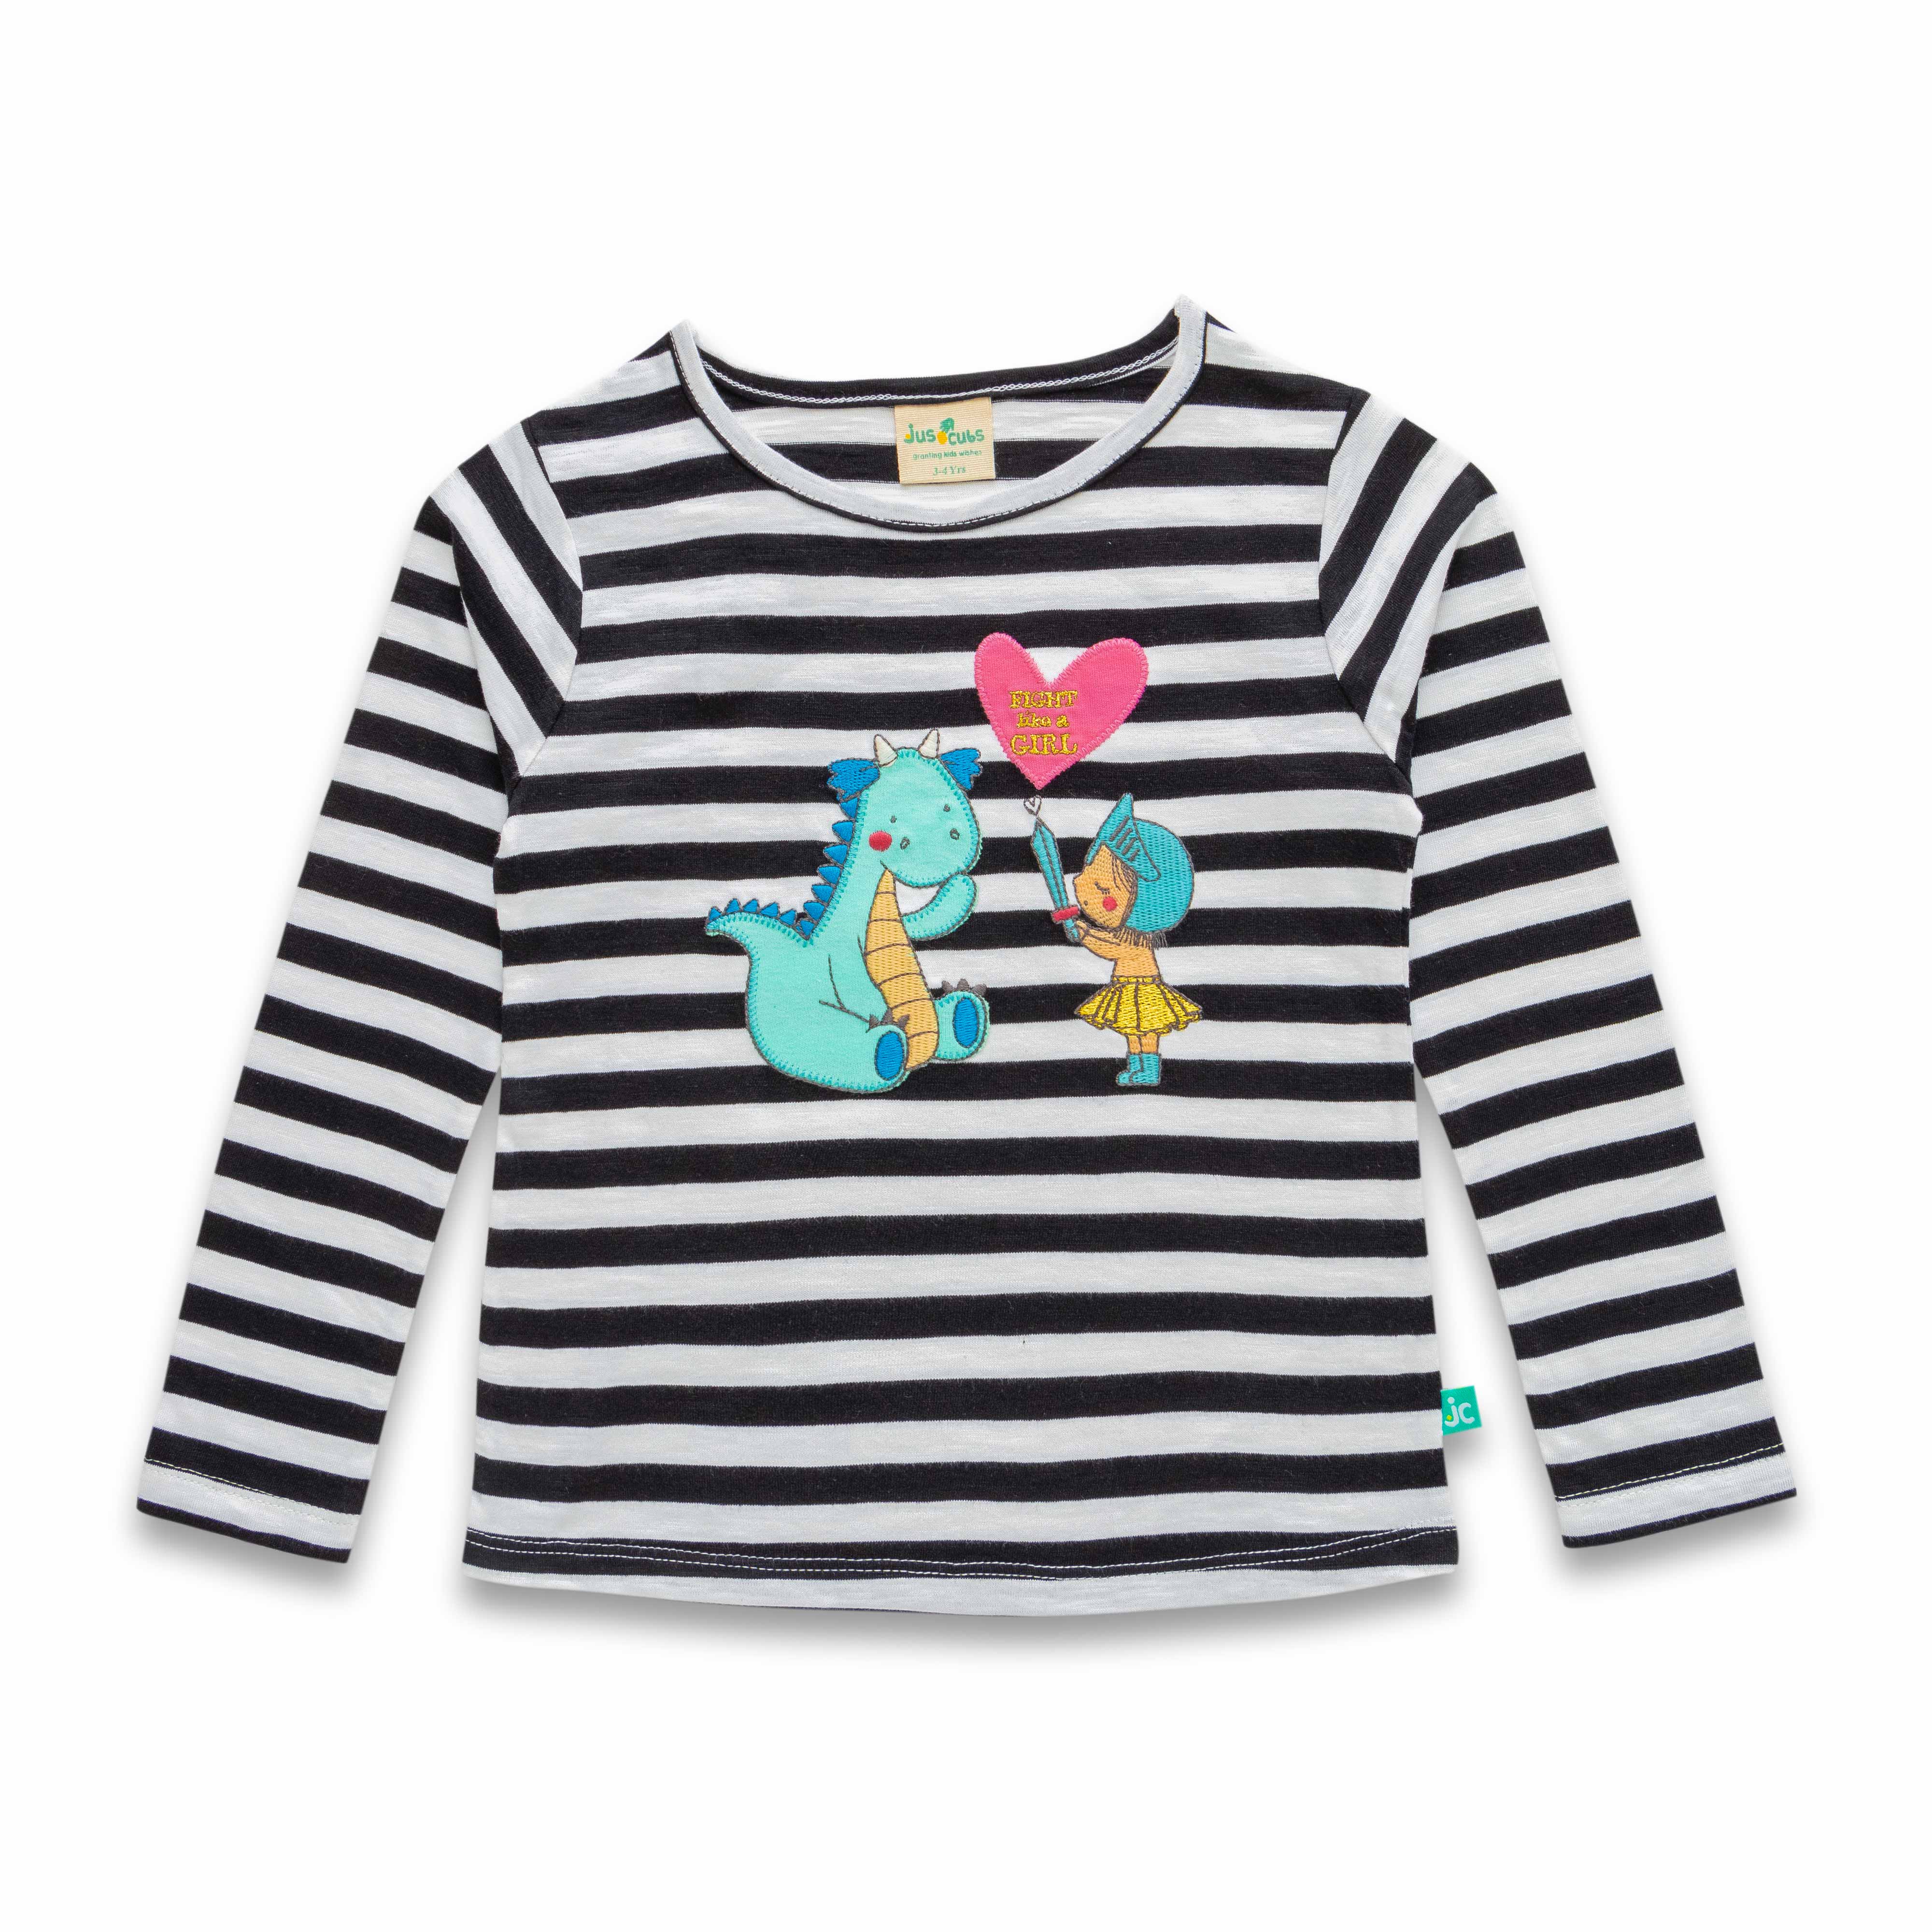 Young Girls Striped & Graphic Printed Full Sleeve T Shirt